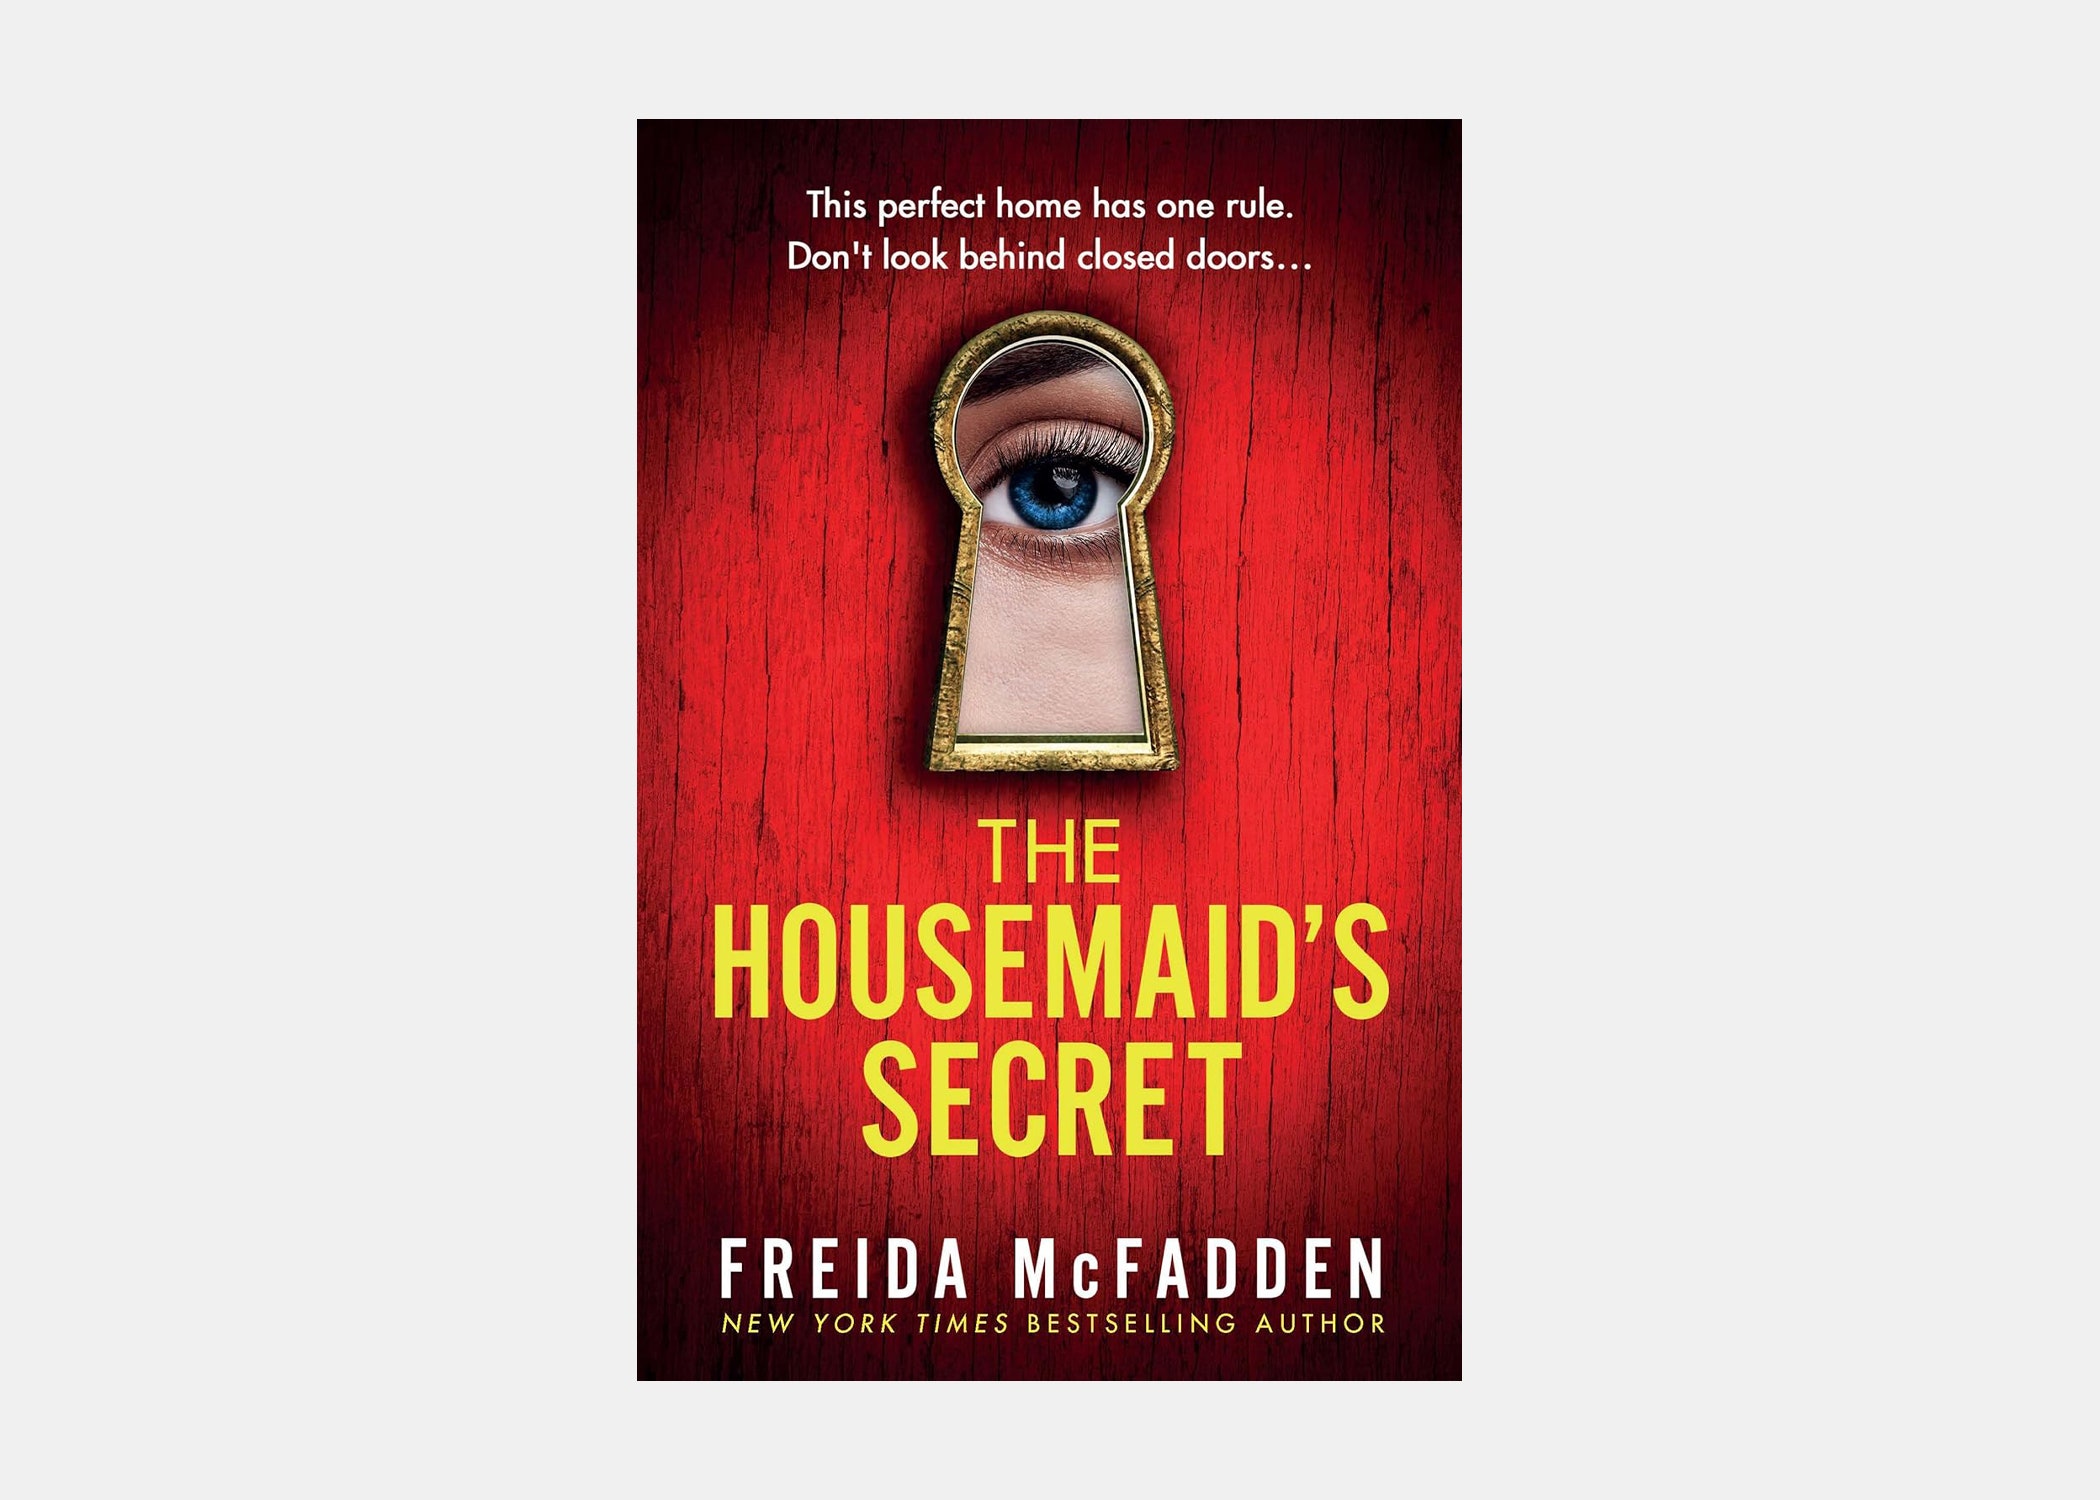 <p>Thrillers are bound to keep you glued to the page when you’re on a flight, and <em>The Housemaid’s Secret</em> is no exception. Although the novel is a sequel to <em>The Housemaid,</em> it can be read as a standalone book. This unique thriller revolves around a maid and her quest to uncover the secrets of the family she works for.</p> <p><strong>Page count:</strong> 227</p> <p><strong>Average read time:</strong> 4 hours and 32 minutes</p> $10, Amazon. <a href="https://www.amazon.com/Housemaids-Secret-Freida-McFadden/dp/0349132615/ref=tmm_pap_swatch_0">Get it now!</a><p>Sign up to receive the latest news, expert tips, and inspiration on all things travel</p><a href="https://www.cntraveler.com/newsletter/the-daily?sourceCode=msnsend">Inspire Me</a>